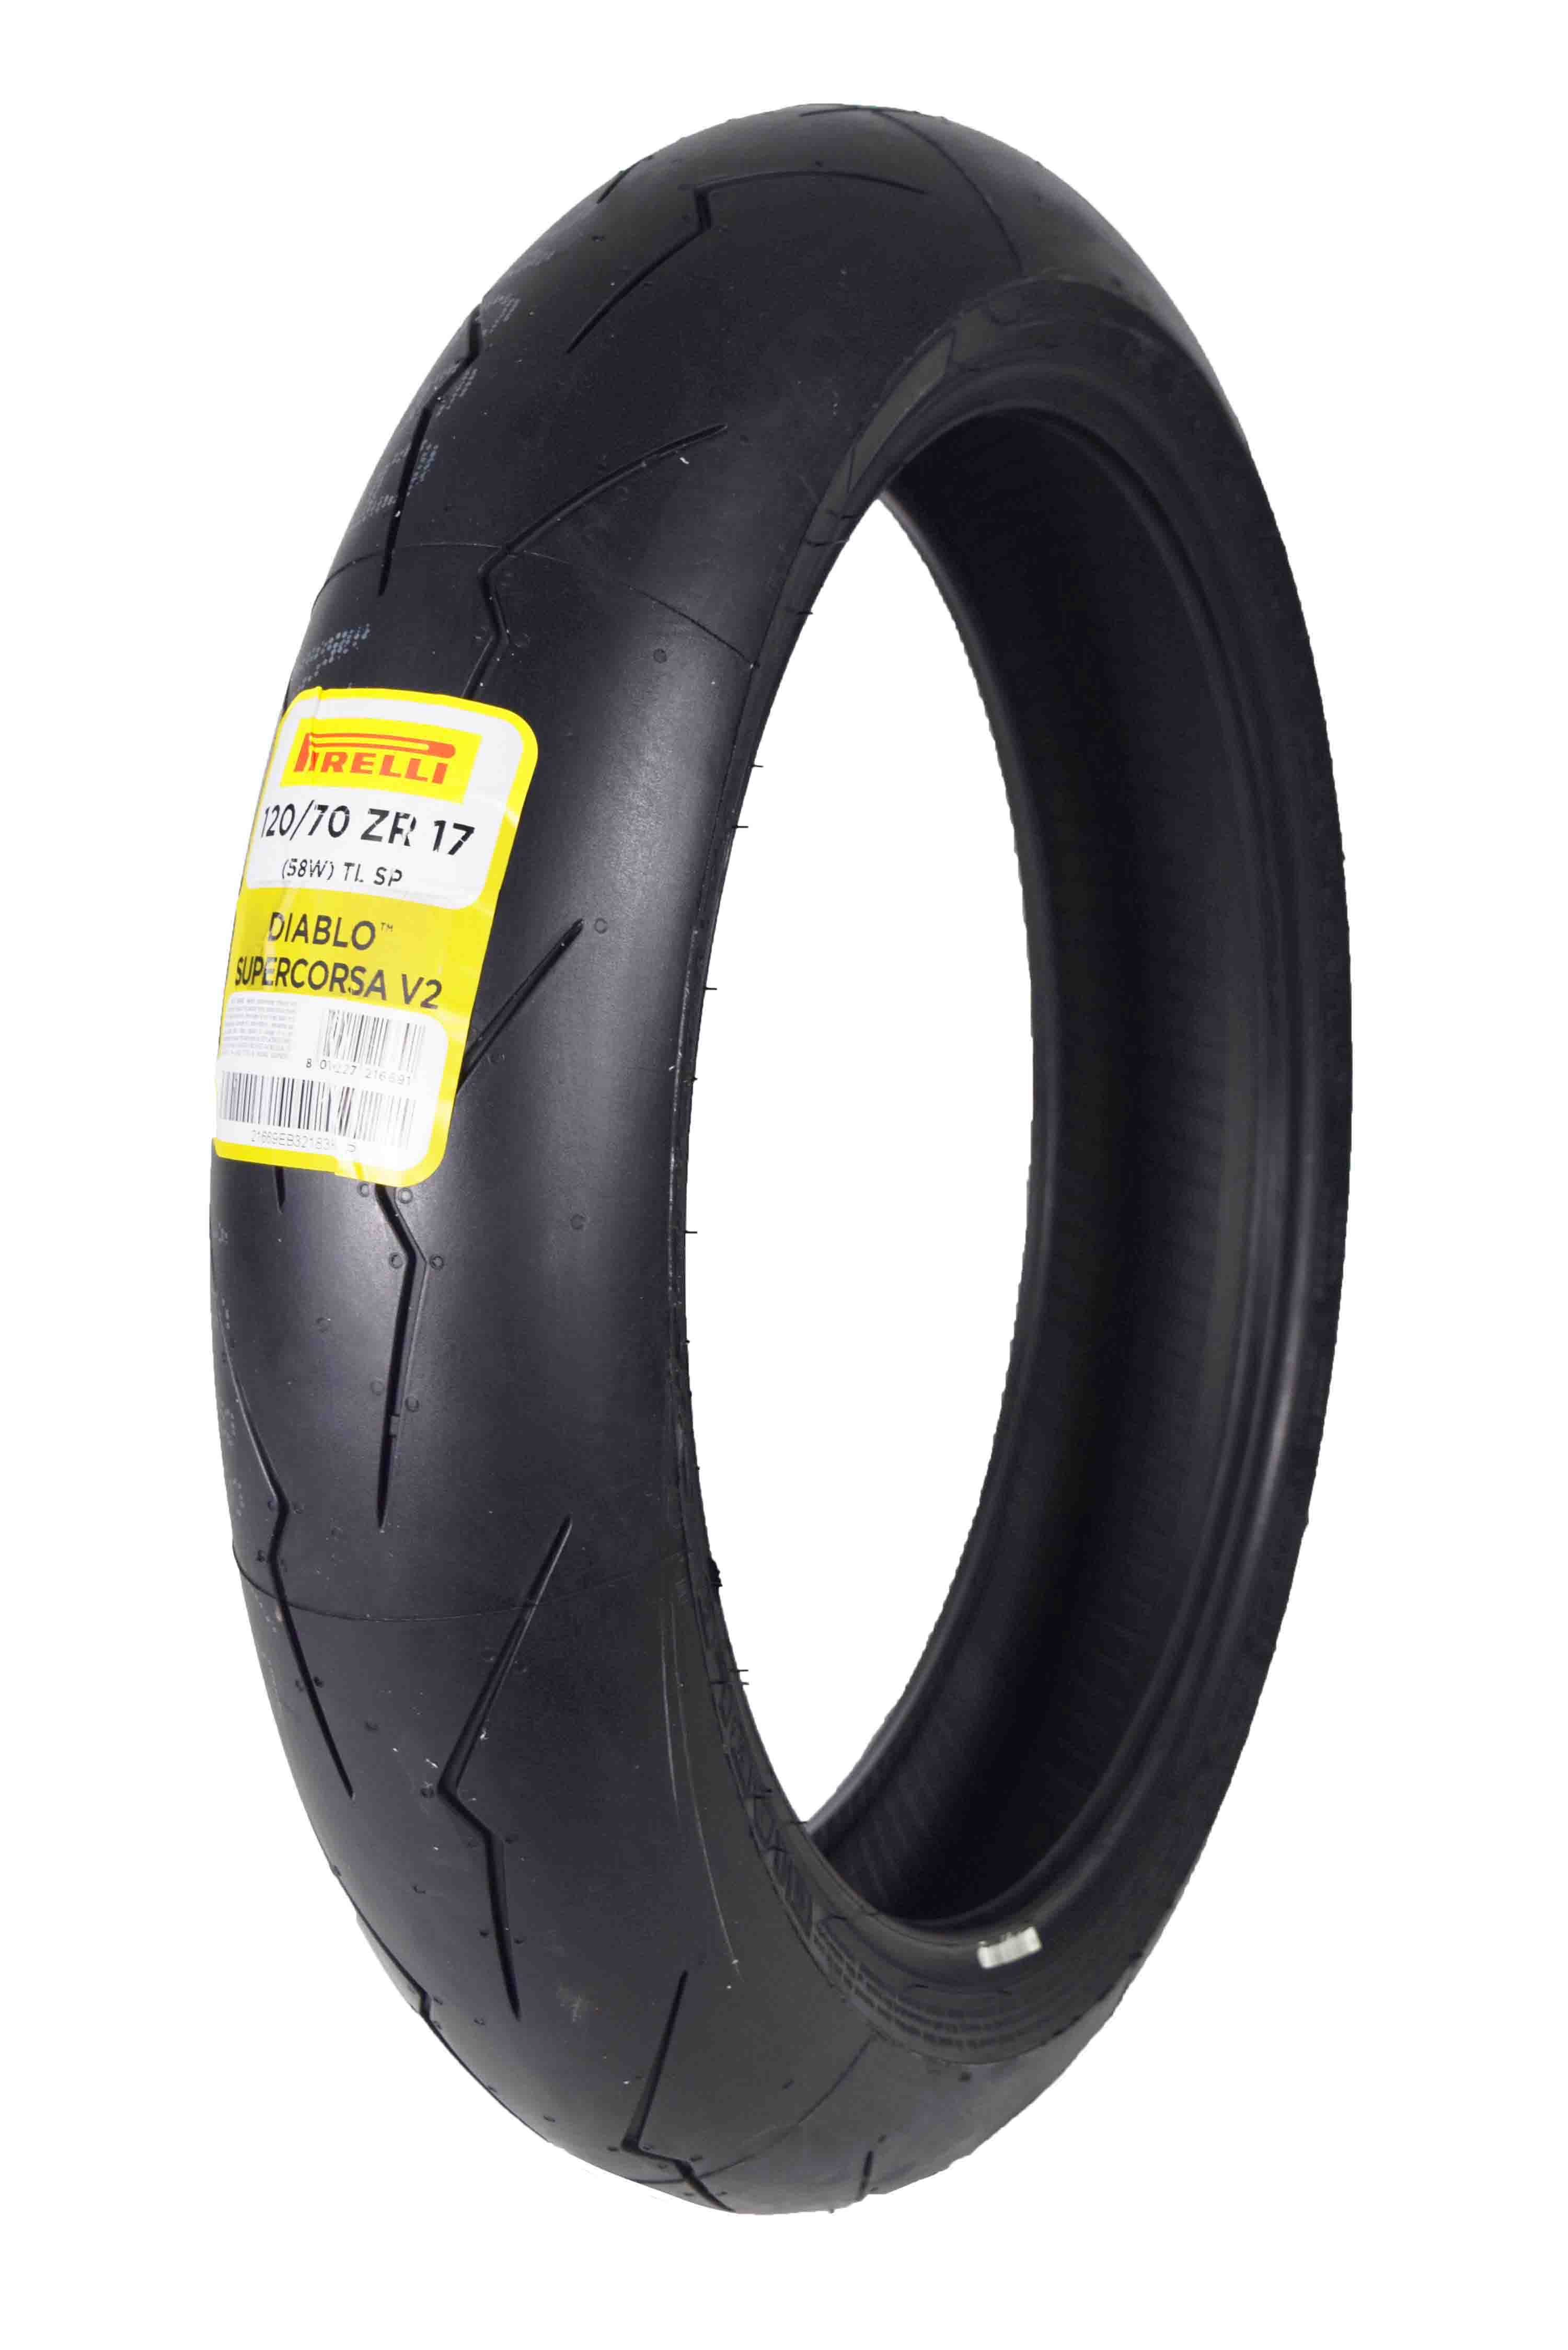 120 70 zr 17 motorcycle tire